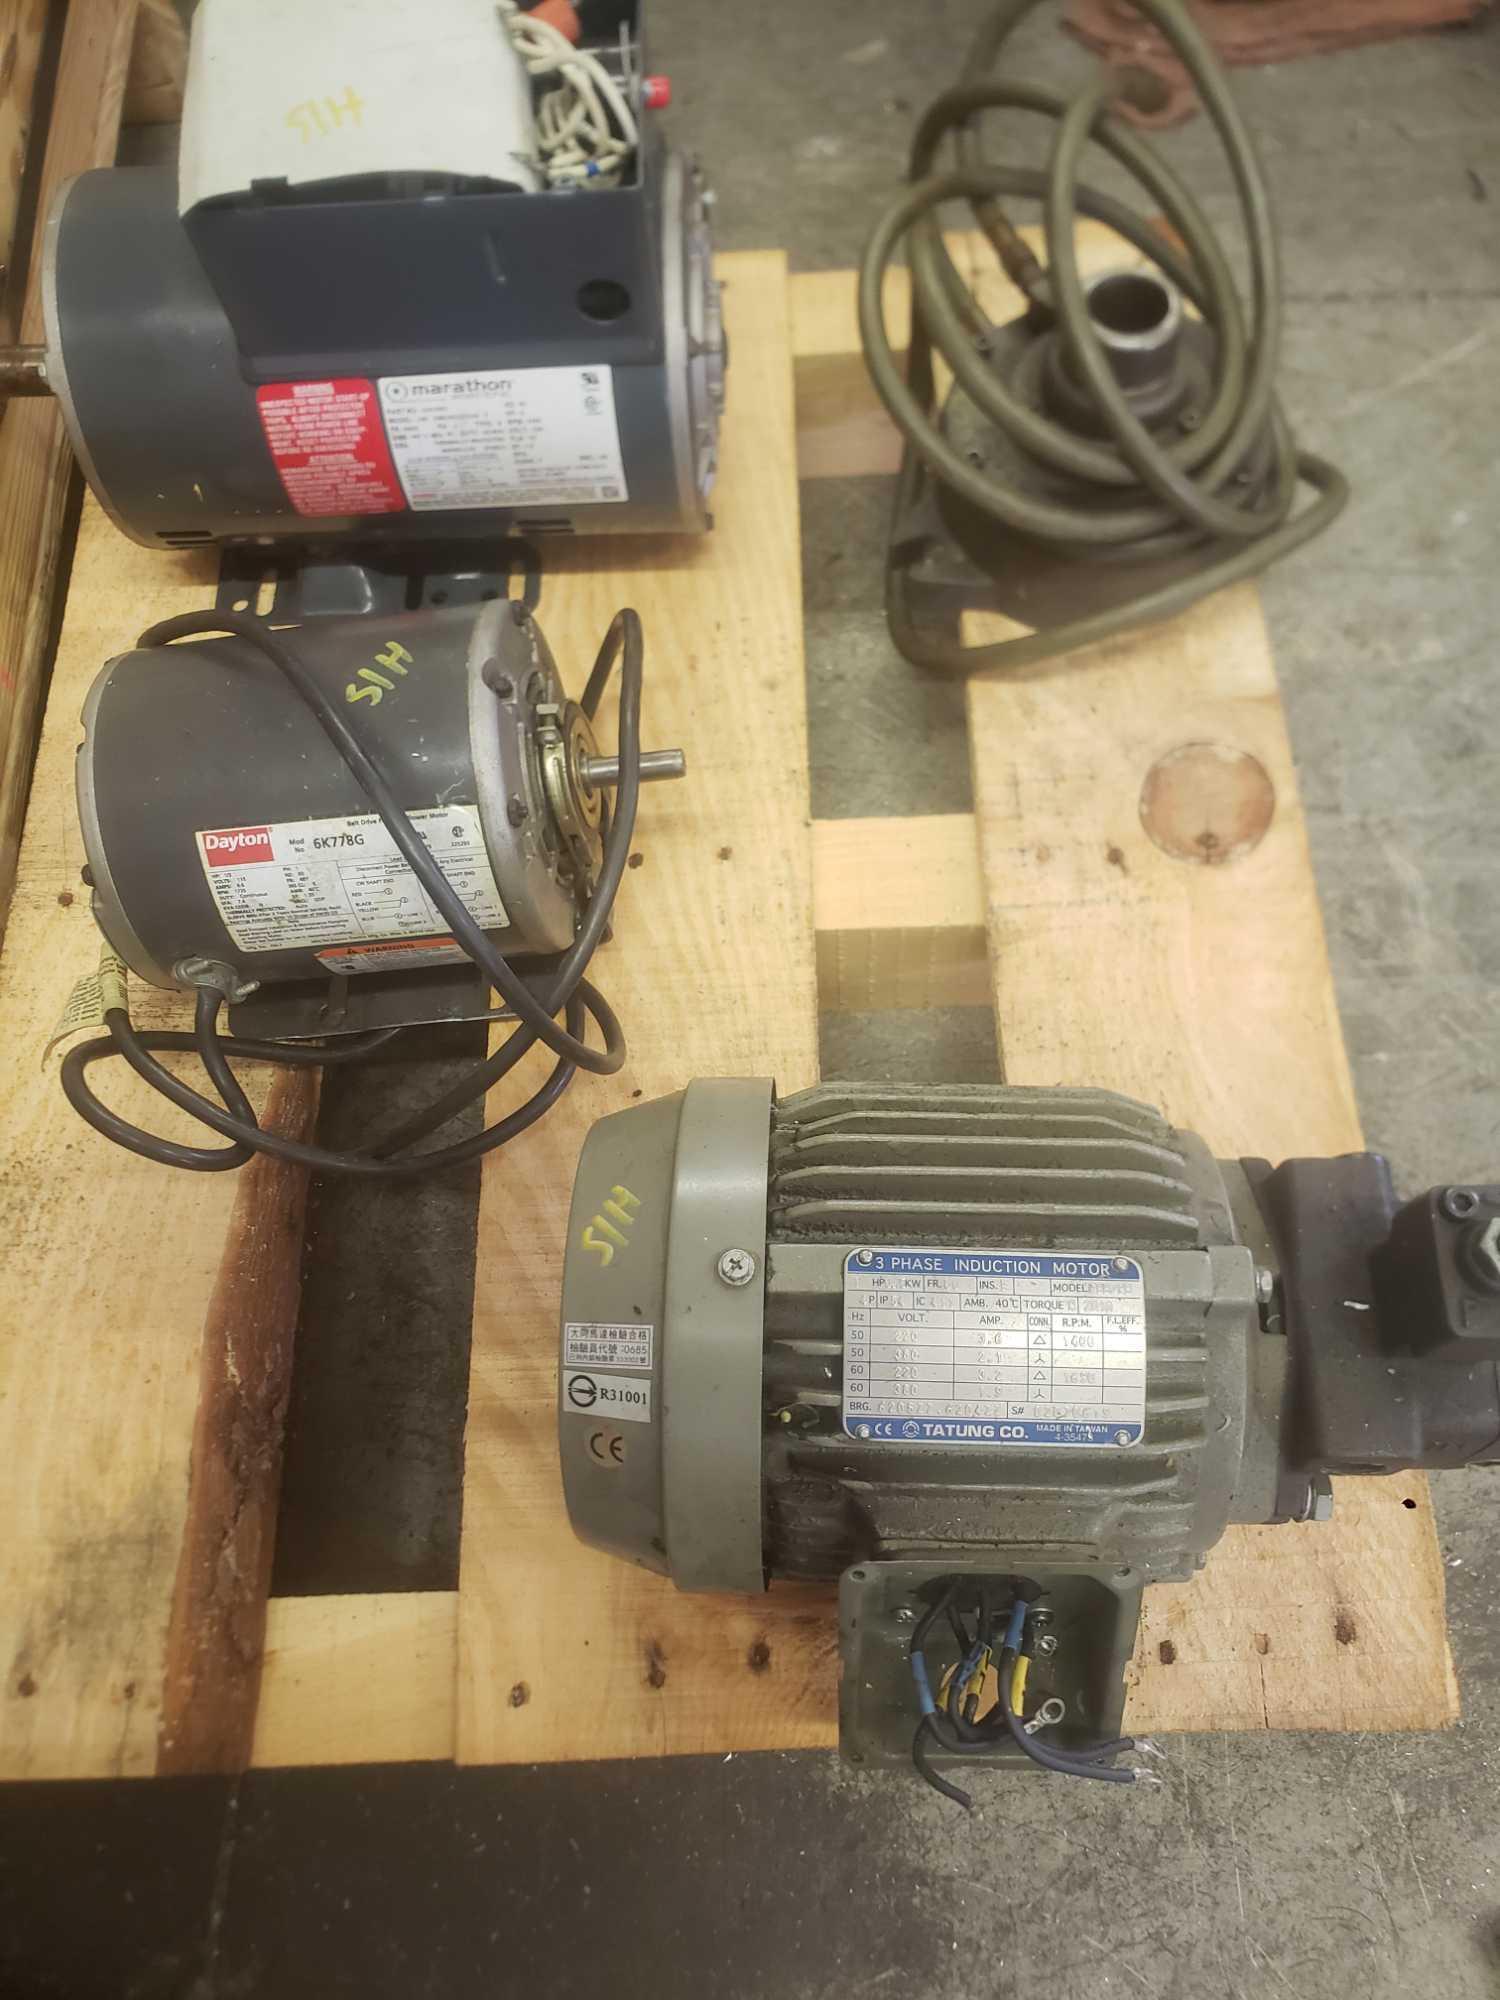 3 electric motors and hydraulic chuck